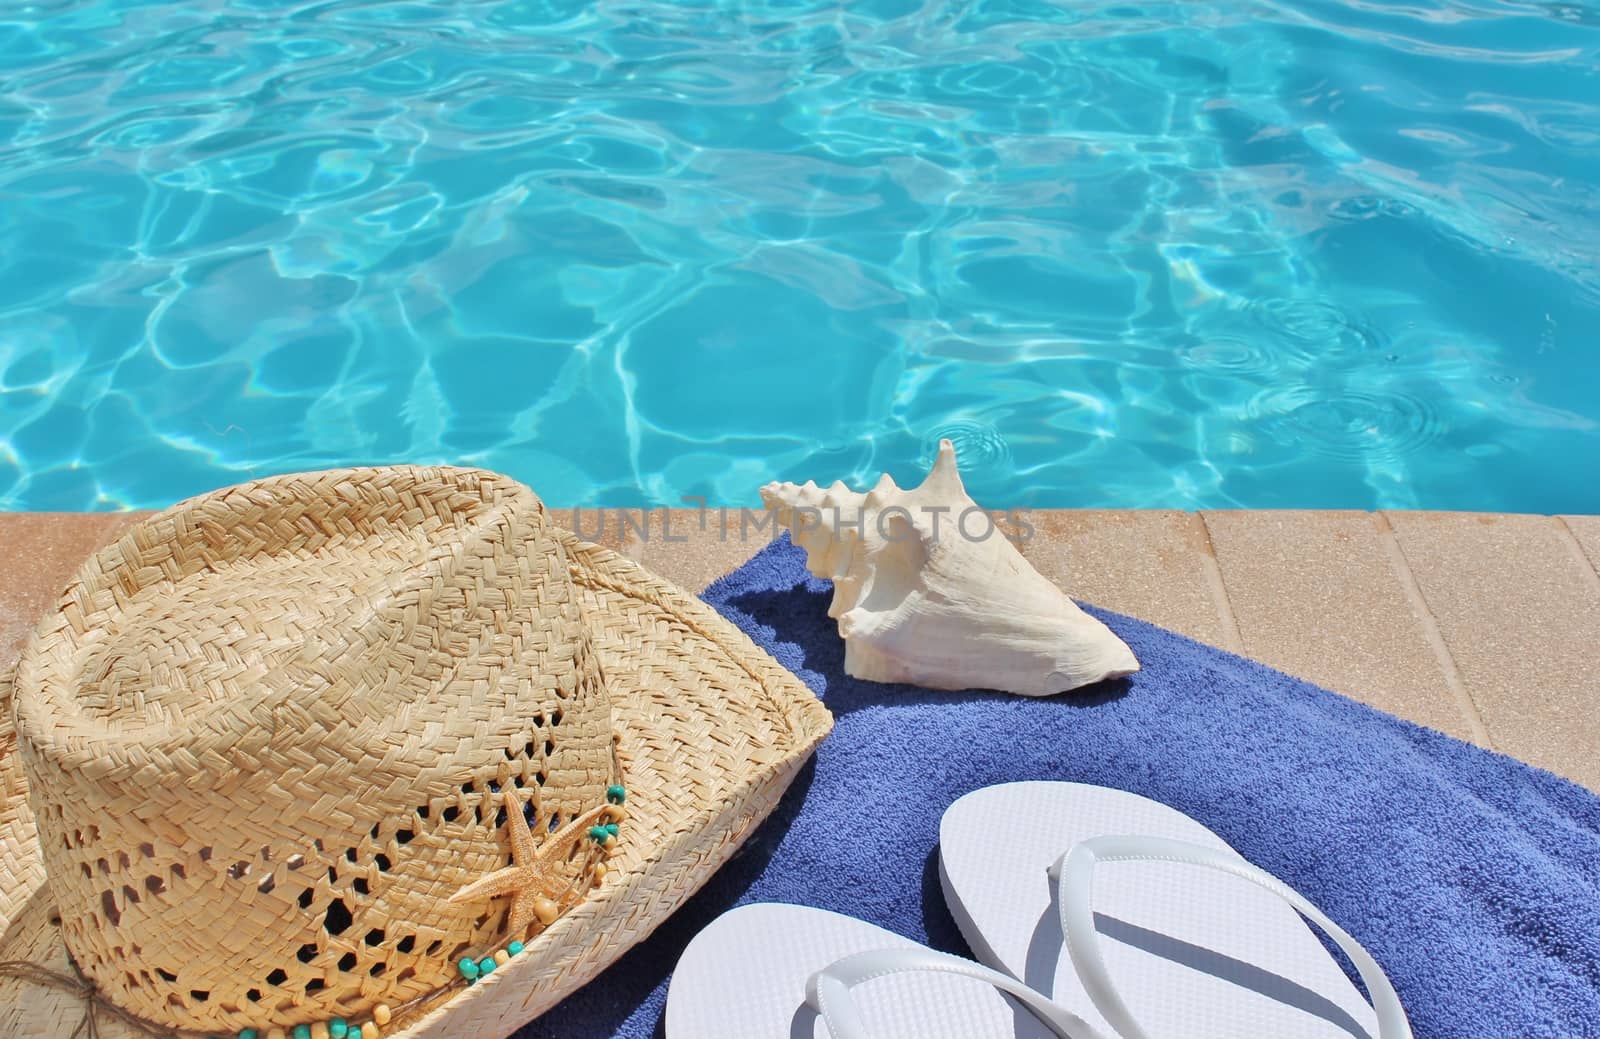 Poolside holiday vacation scenic swimming pool summer by cheekylorns